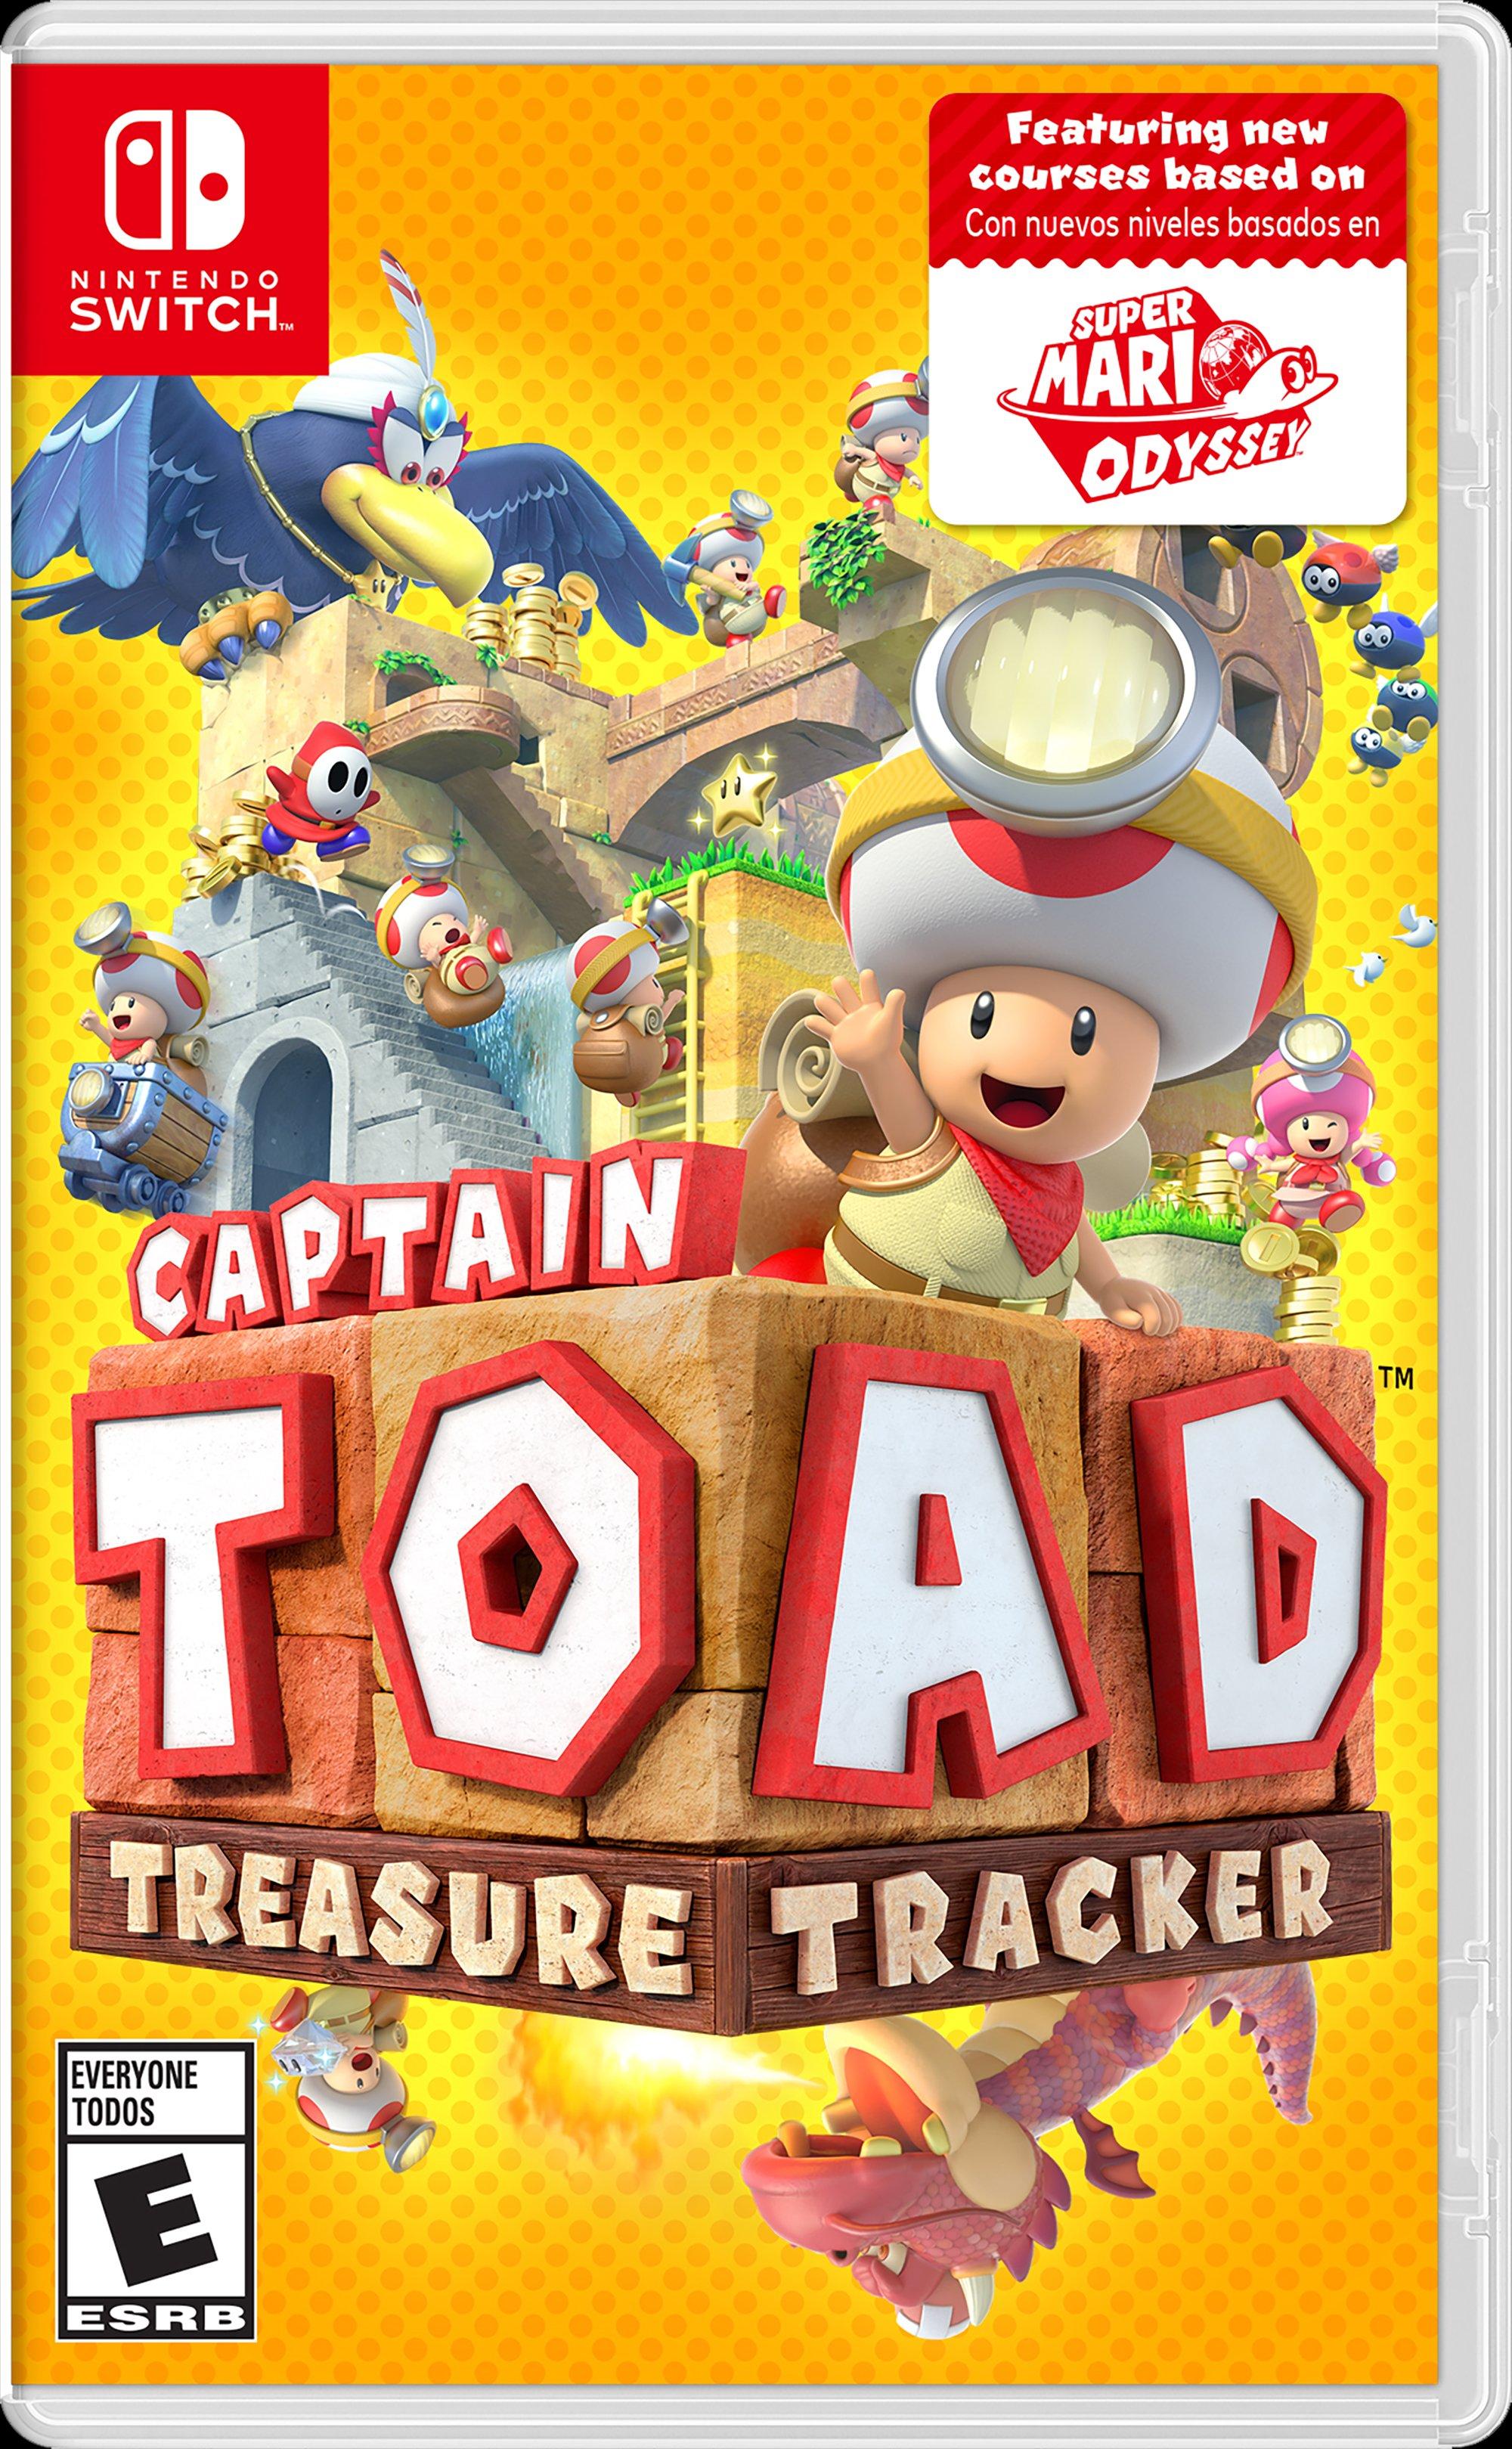 toad switch